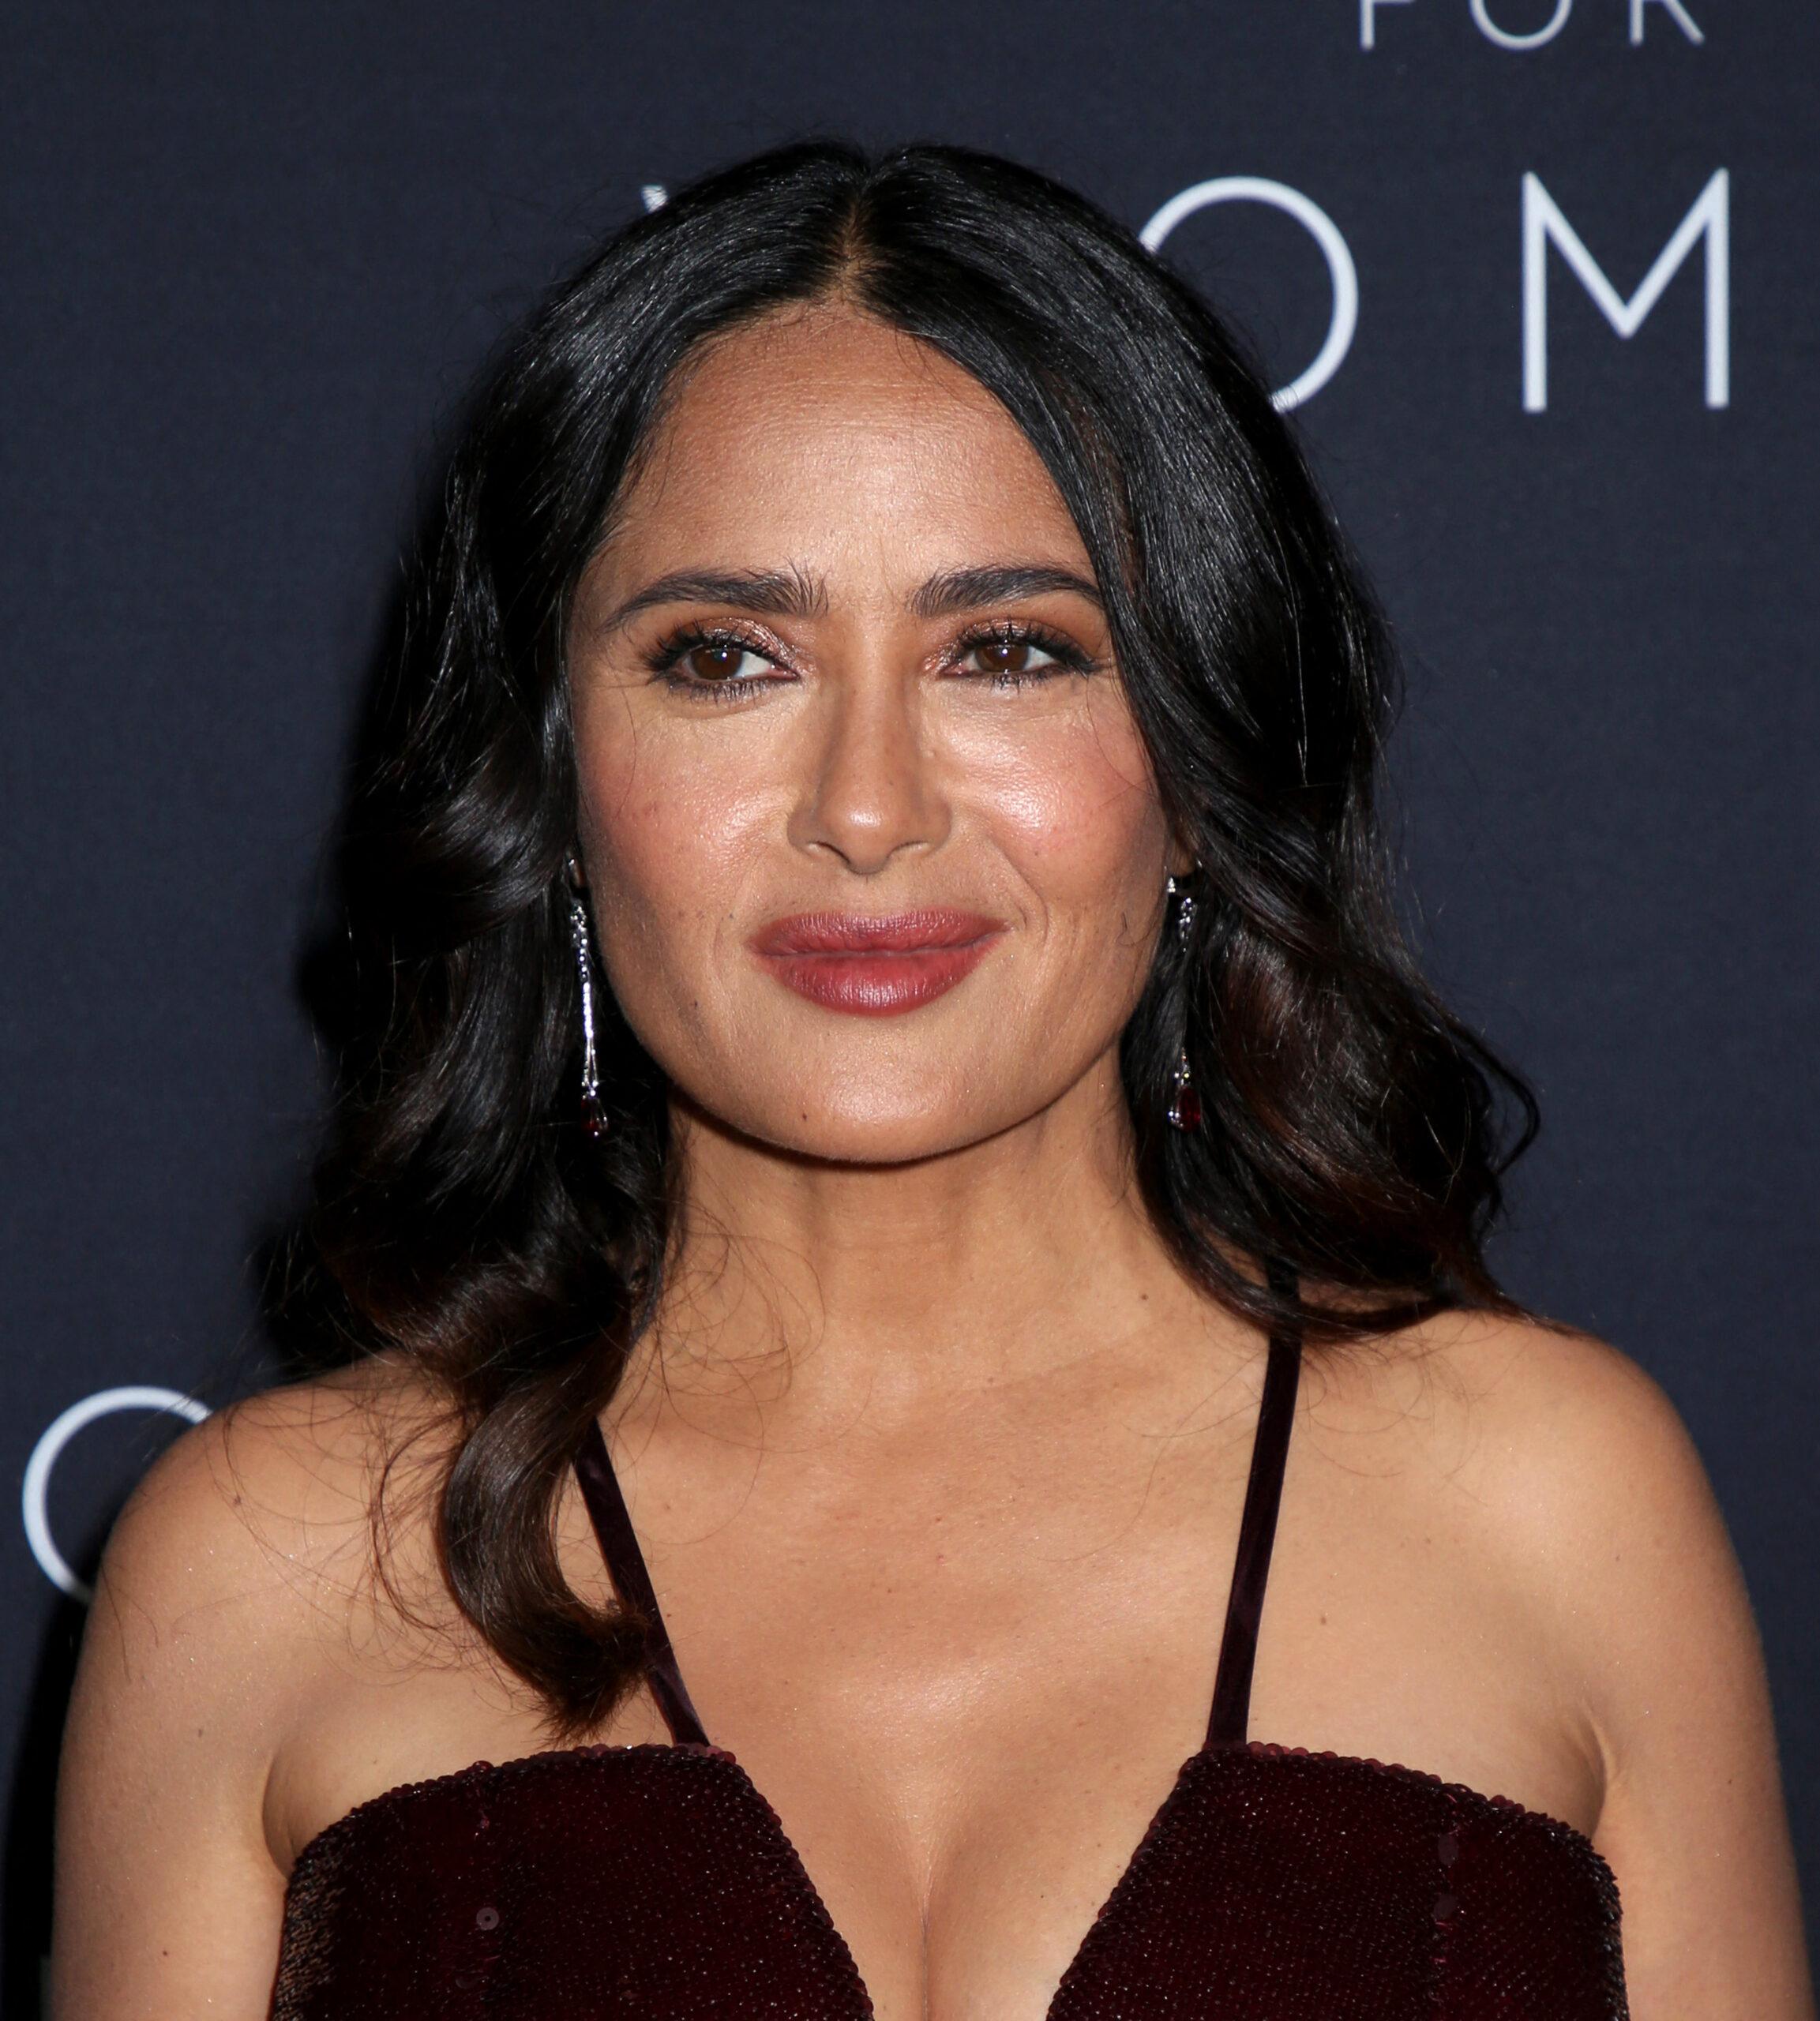 Salma Hayek at the Kering Foundation's 2nd Annual Caring for Women dinner